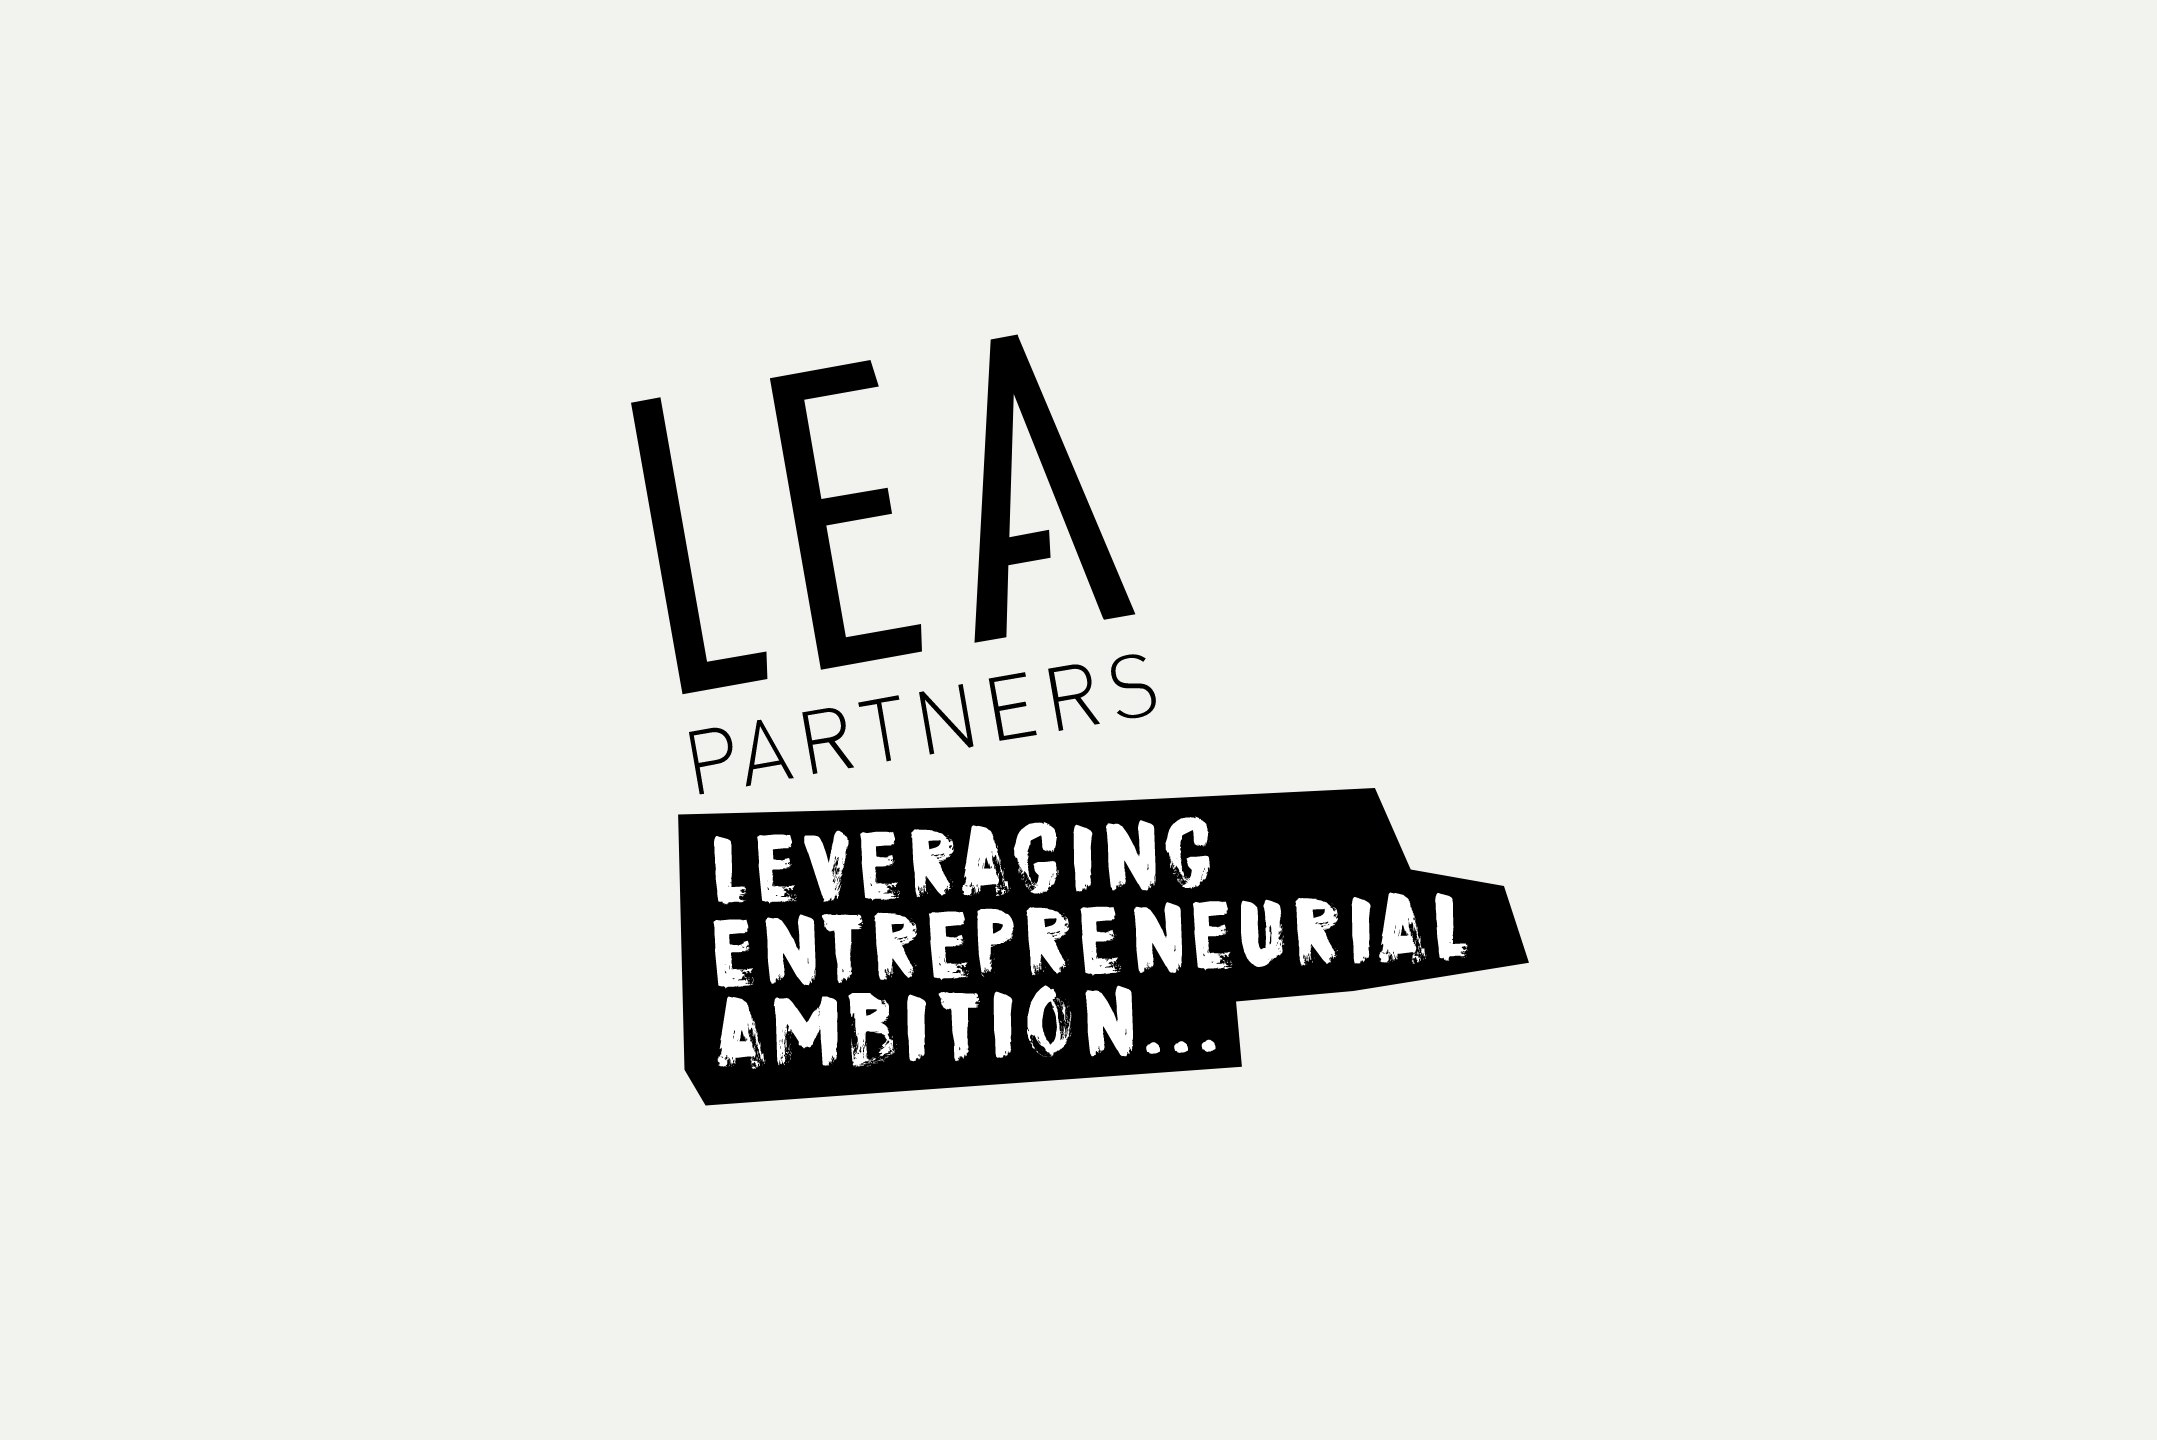 Logo from our investor Lea Partners